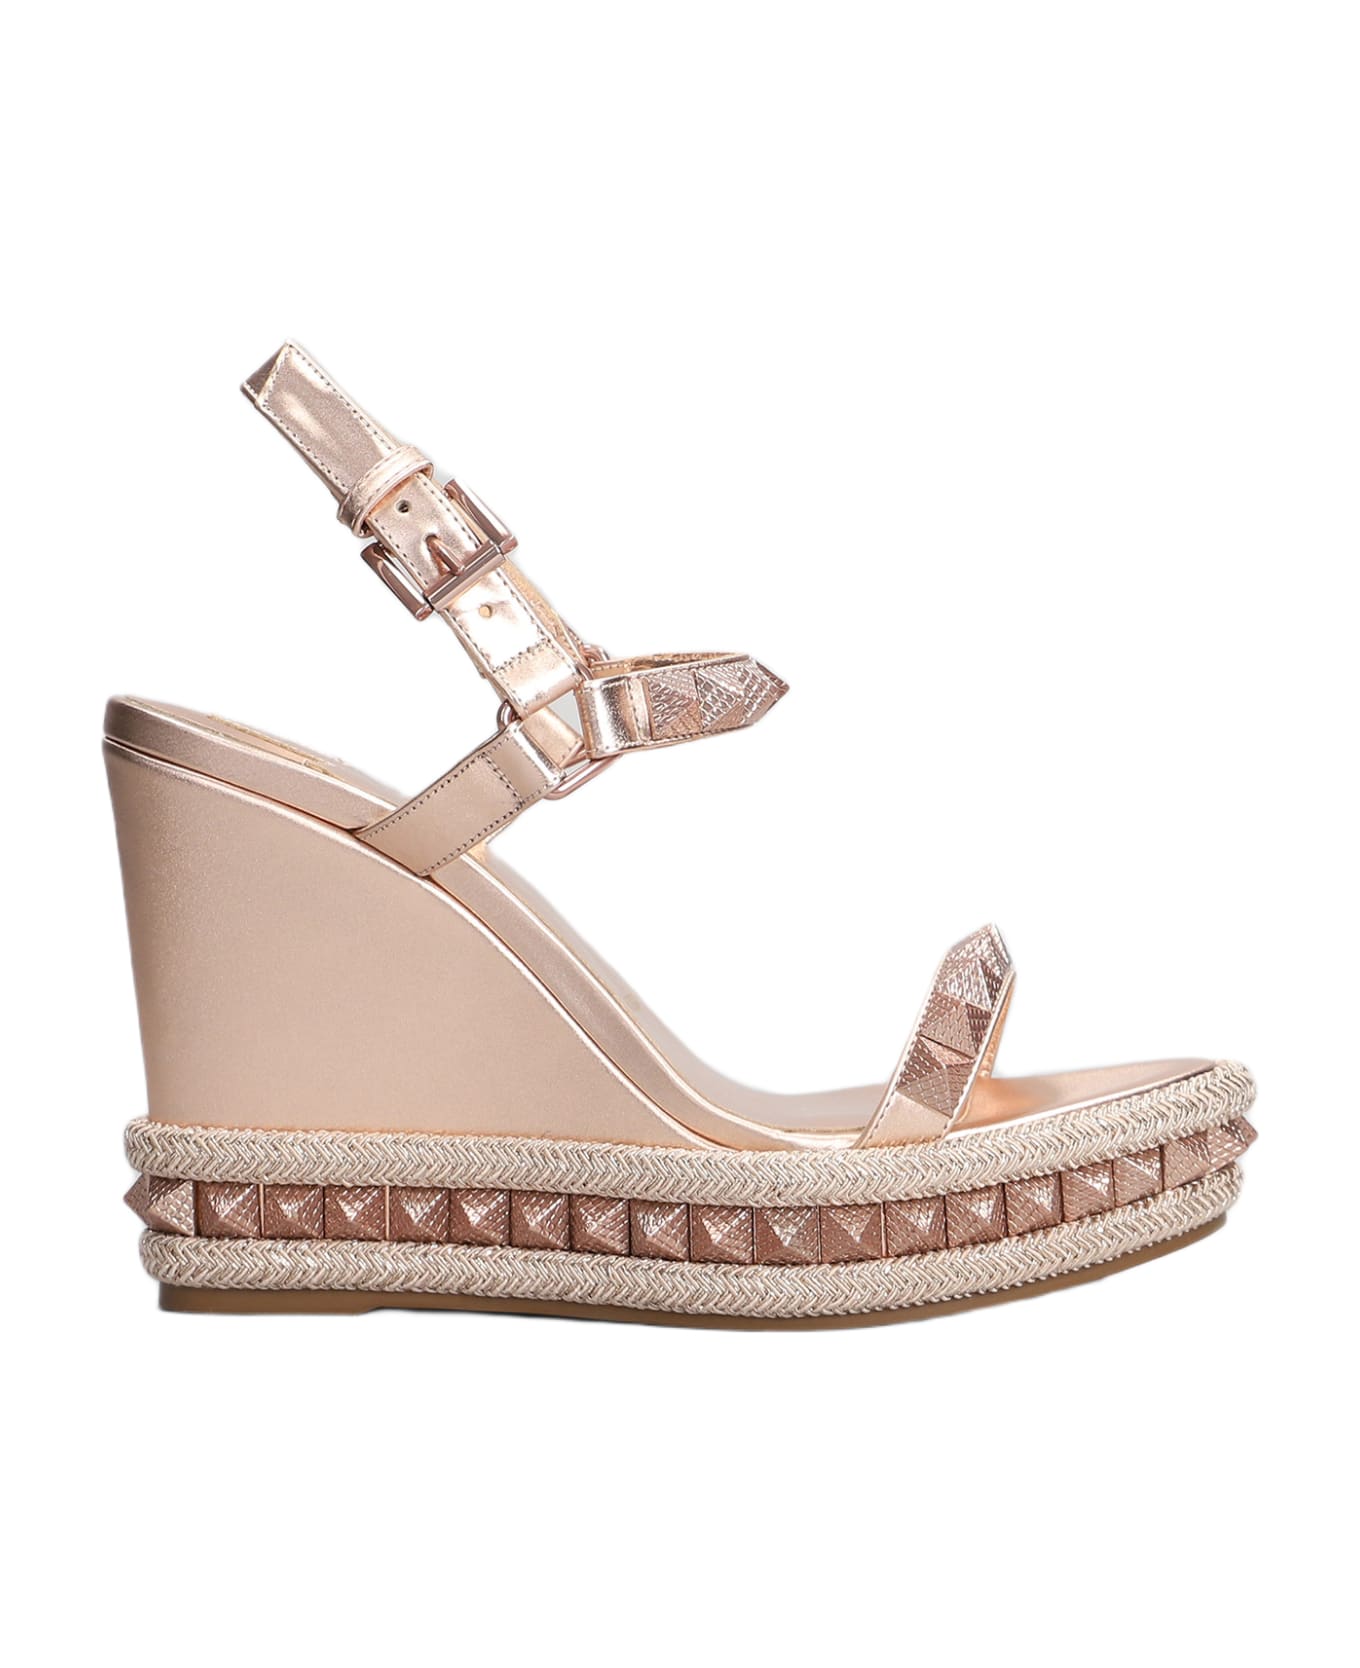 Christian Louboutin Pyraclou 110 Sandals In Rose-pink Leather - rose-pink サンダル